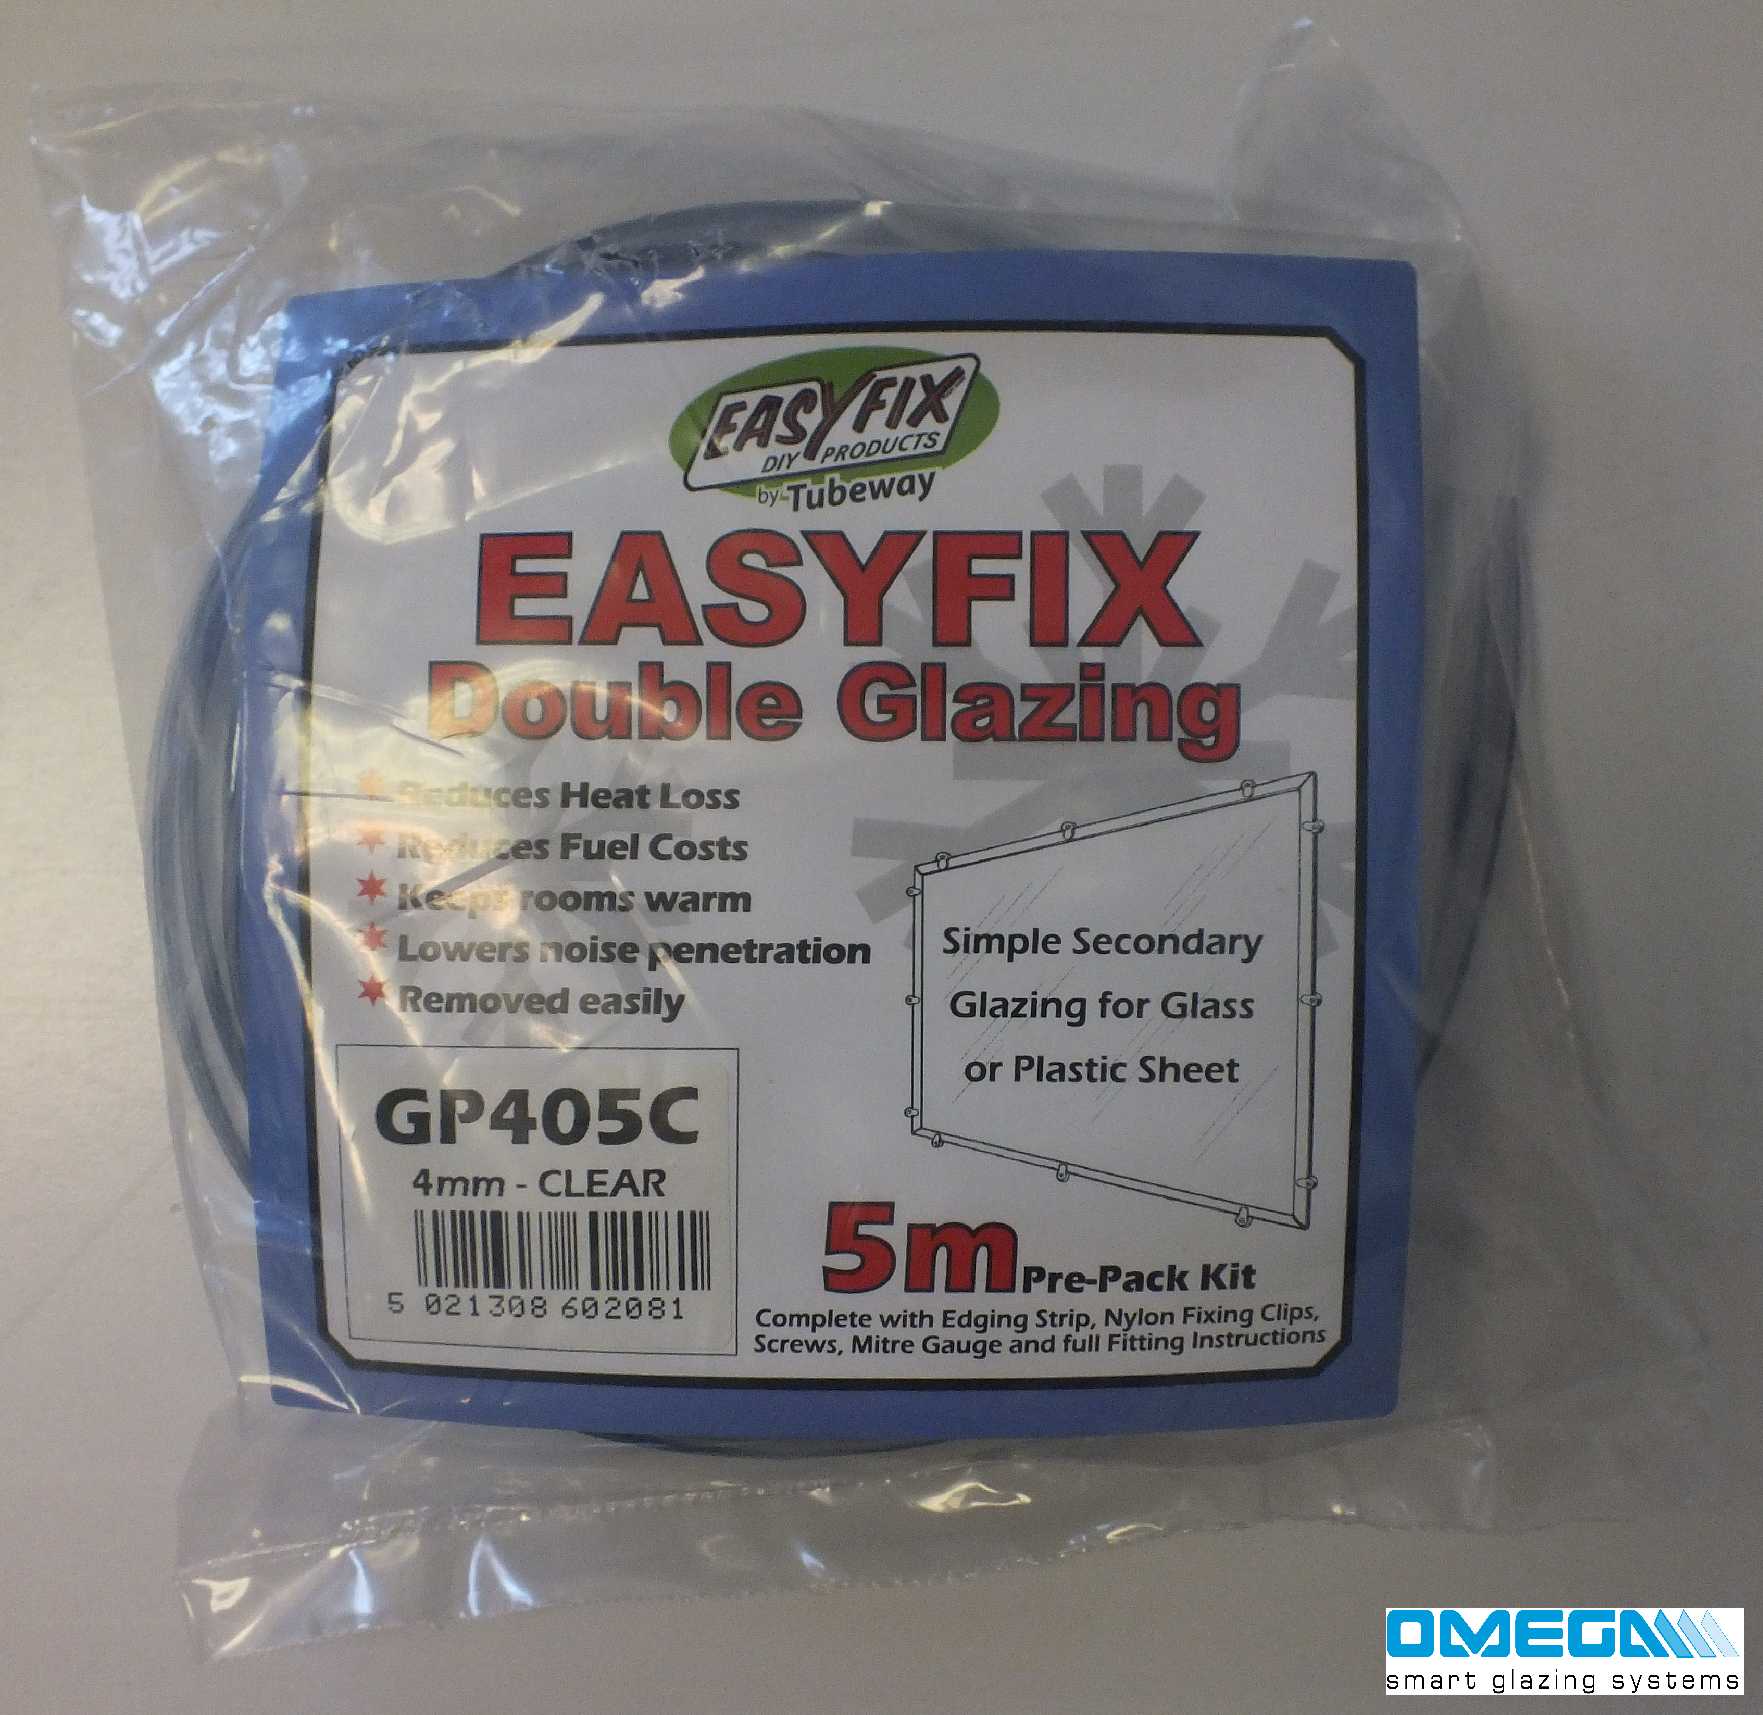 Buy Easyfix Clipglaze Edging Kit - 5m roll of edging for 6mm Glazing Thickness, Clear online today